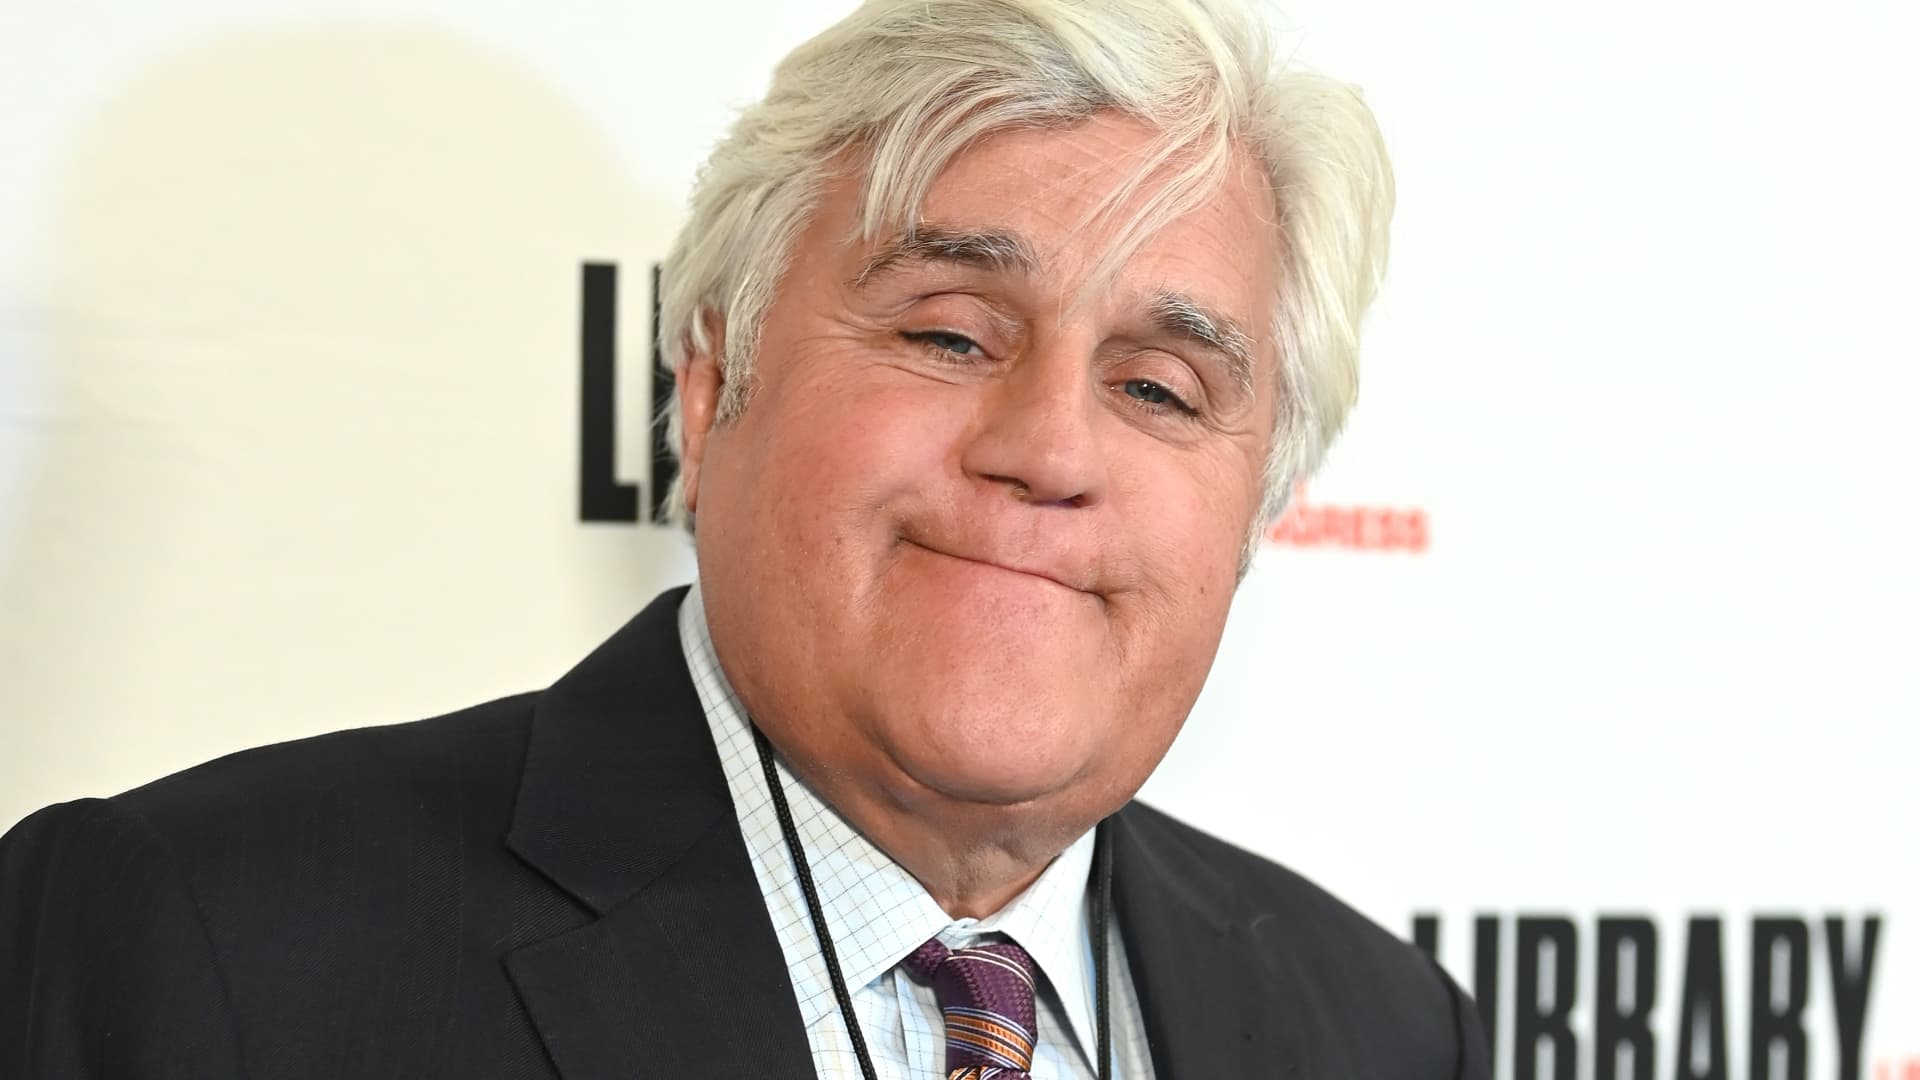 Jay Leno says he’s ‘ok’ after he suffers serious burns in car fire